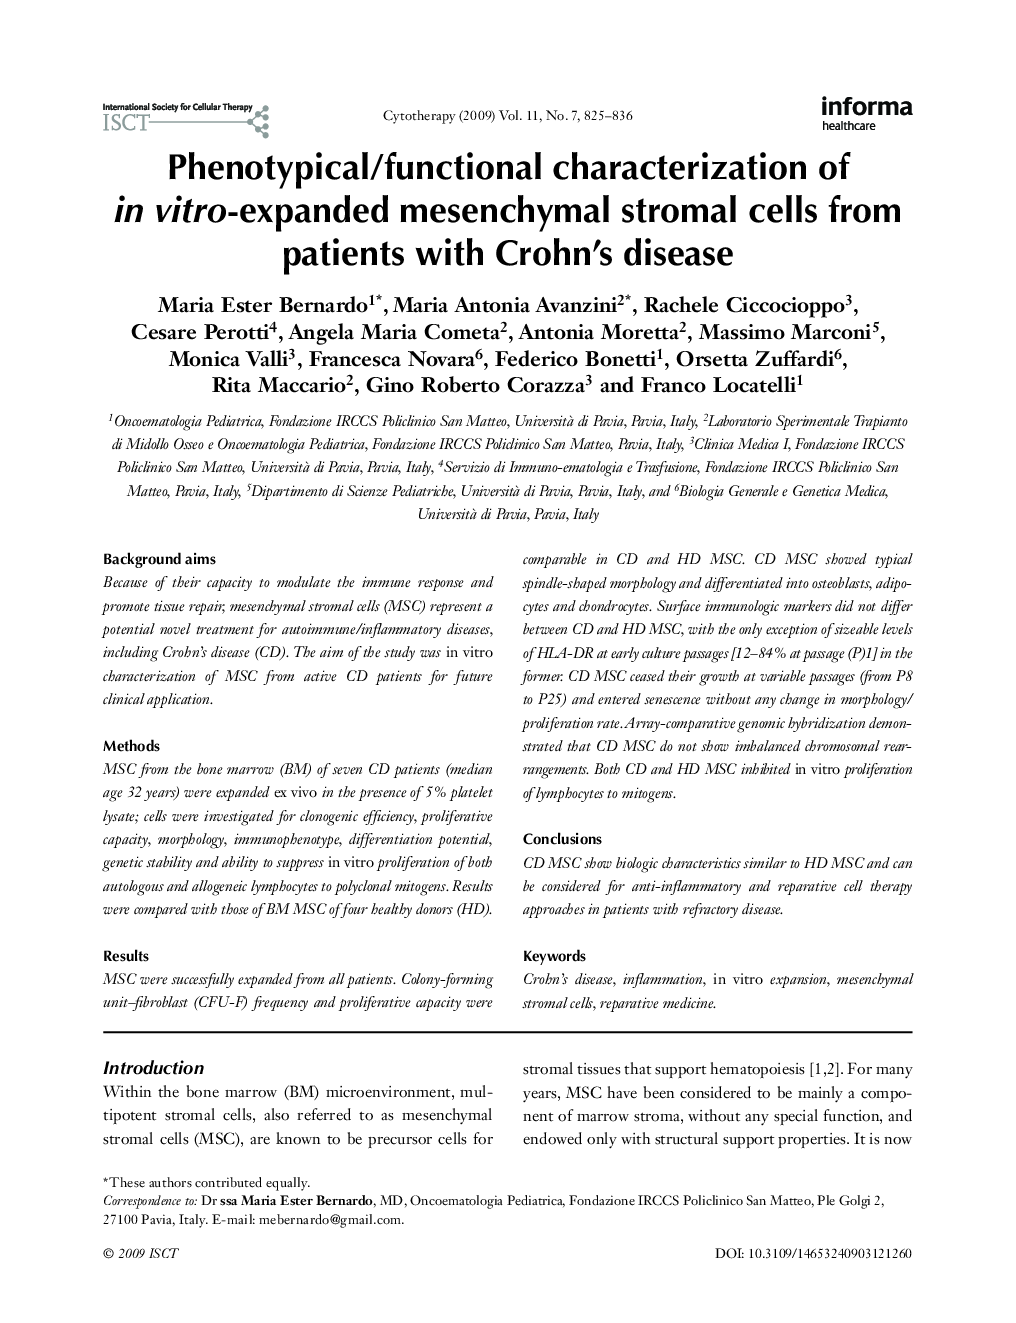 Phenotypical/functional characterization of in vitro-expanded mesenchymal stromal cells from patients with Crohn's disease